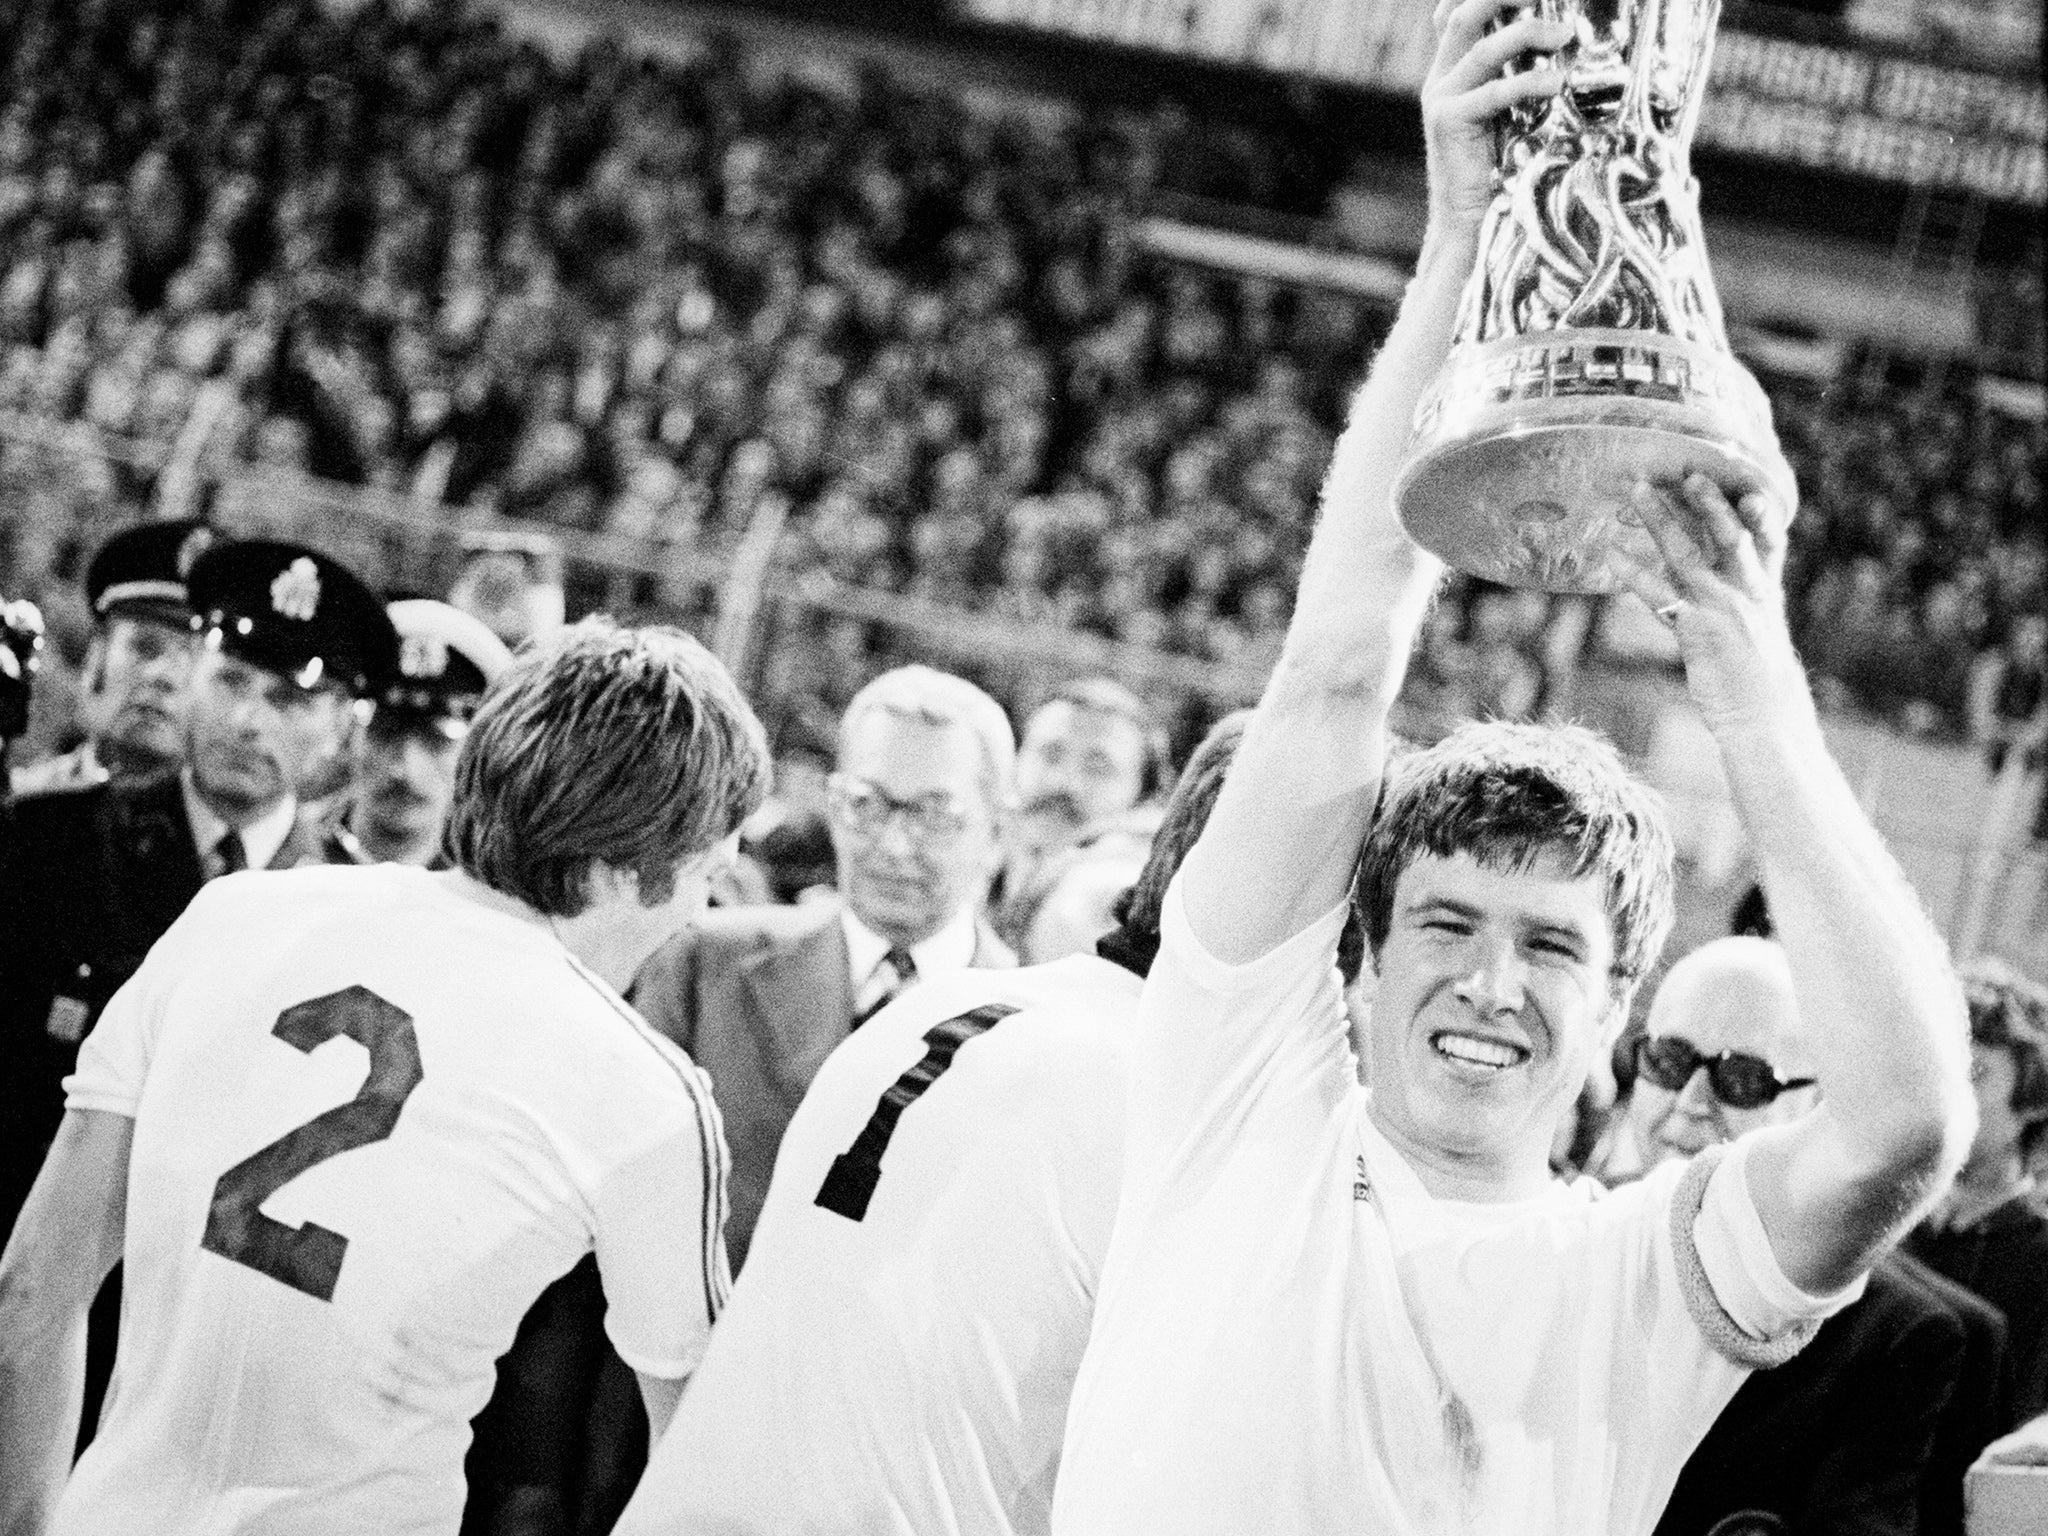 Emlyn Hughes, Liverpool's then-captain, lifts the Uefa Cup in 1976